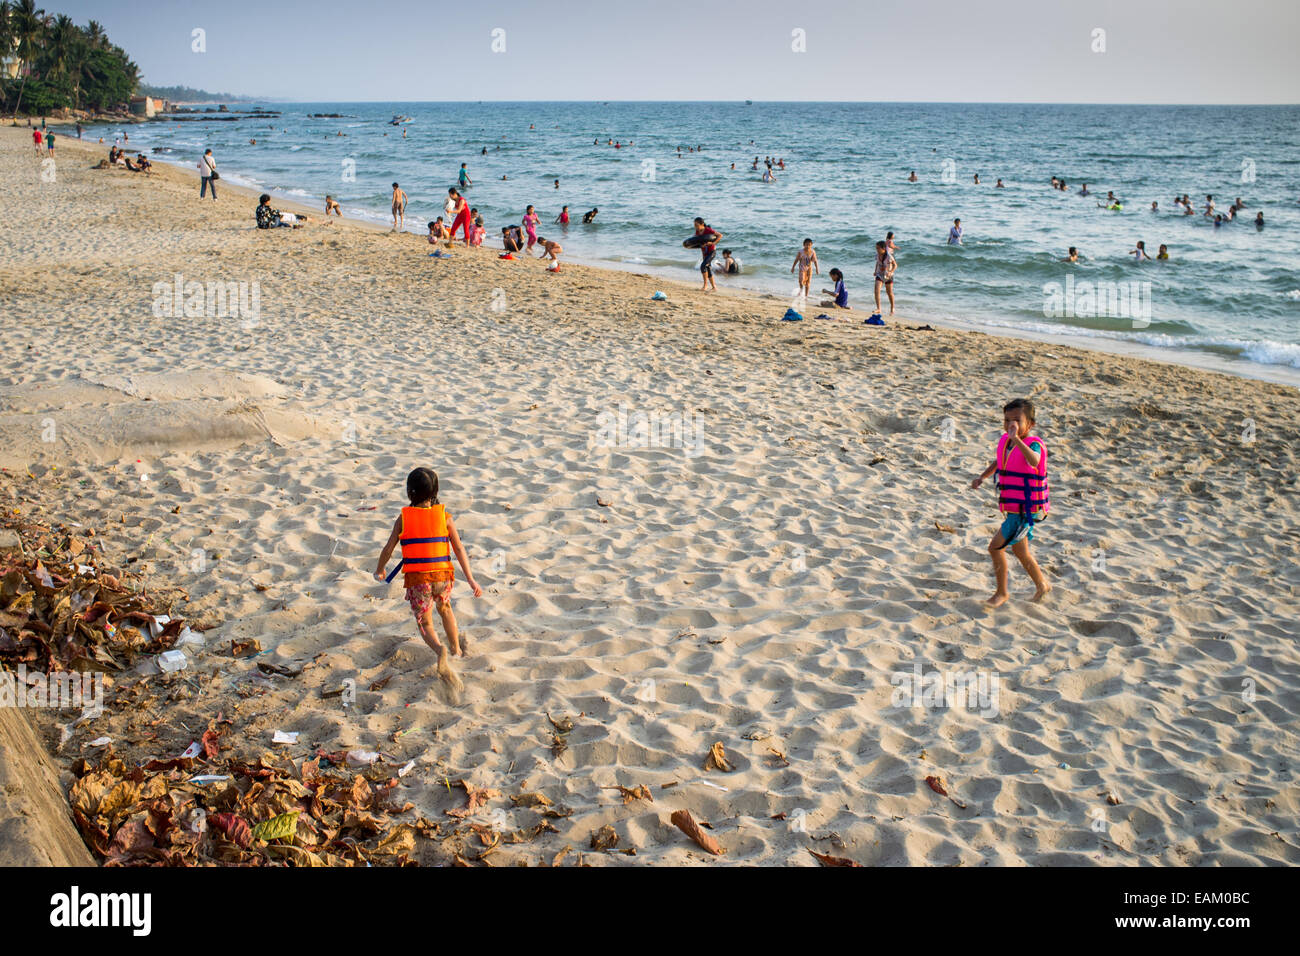 Beach of the locals, Duong Dong, Phu Quoc island, Vietnam, Asia Stock Photo